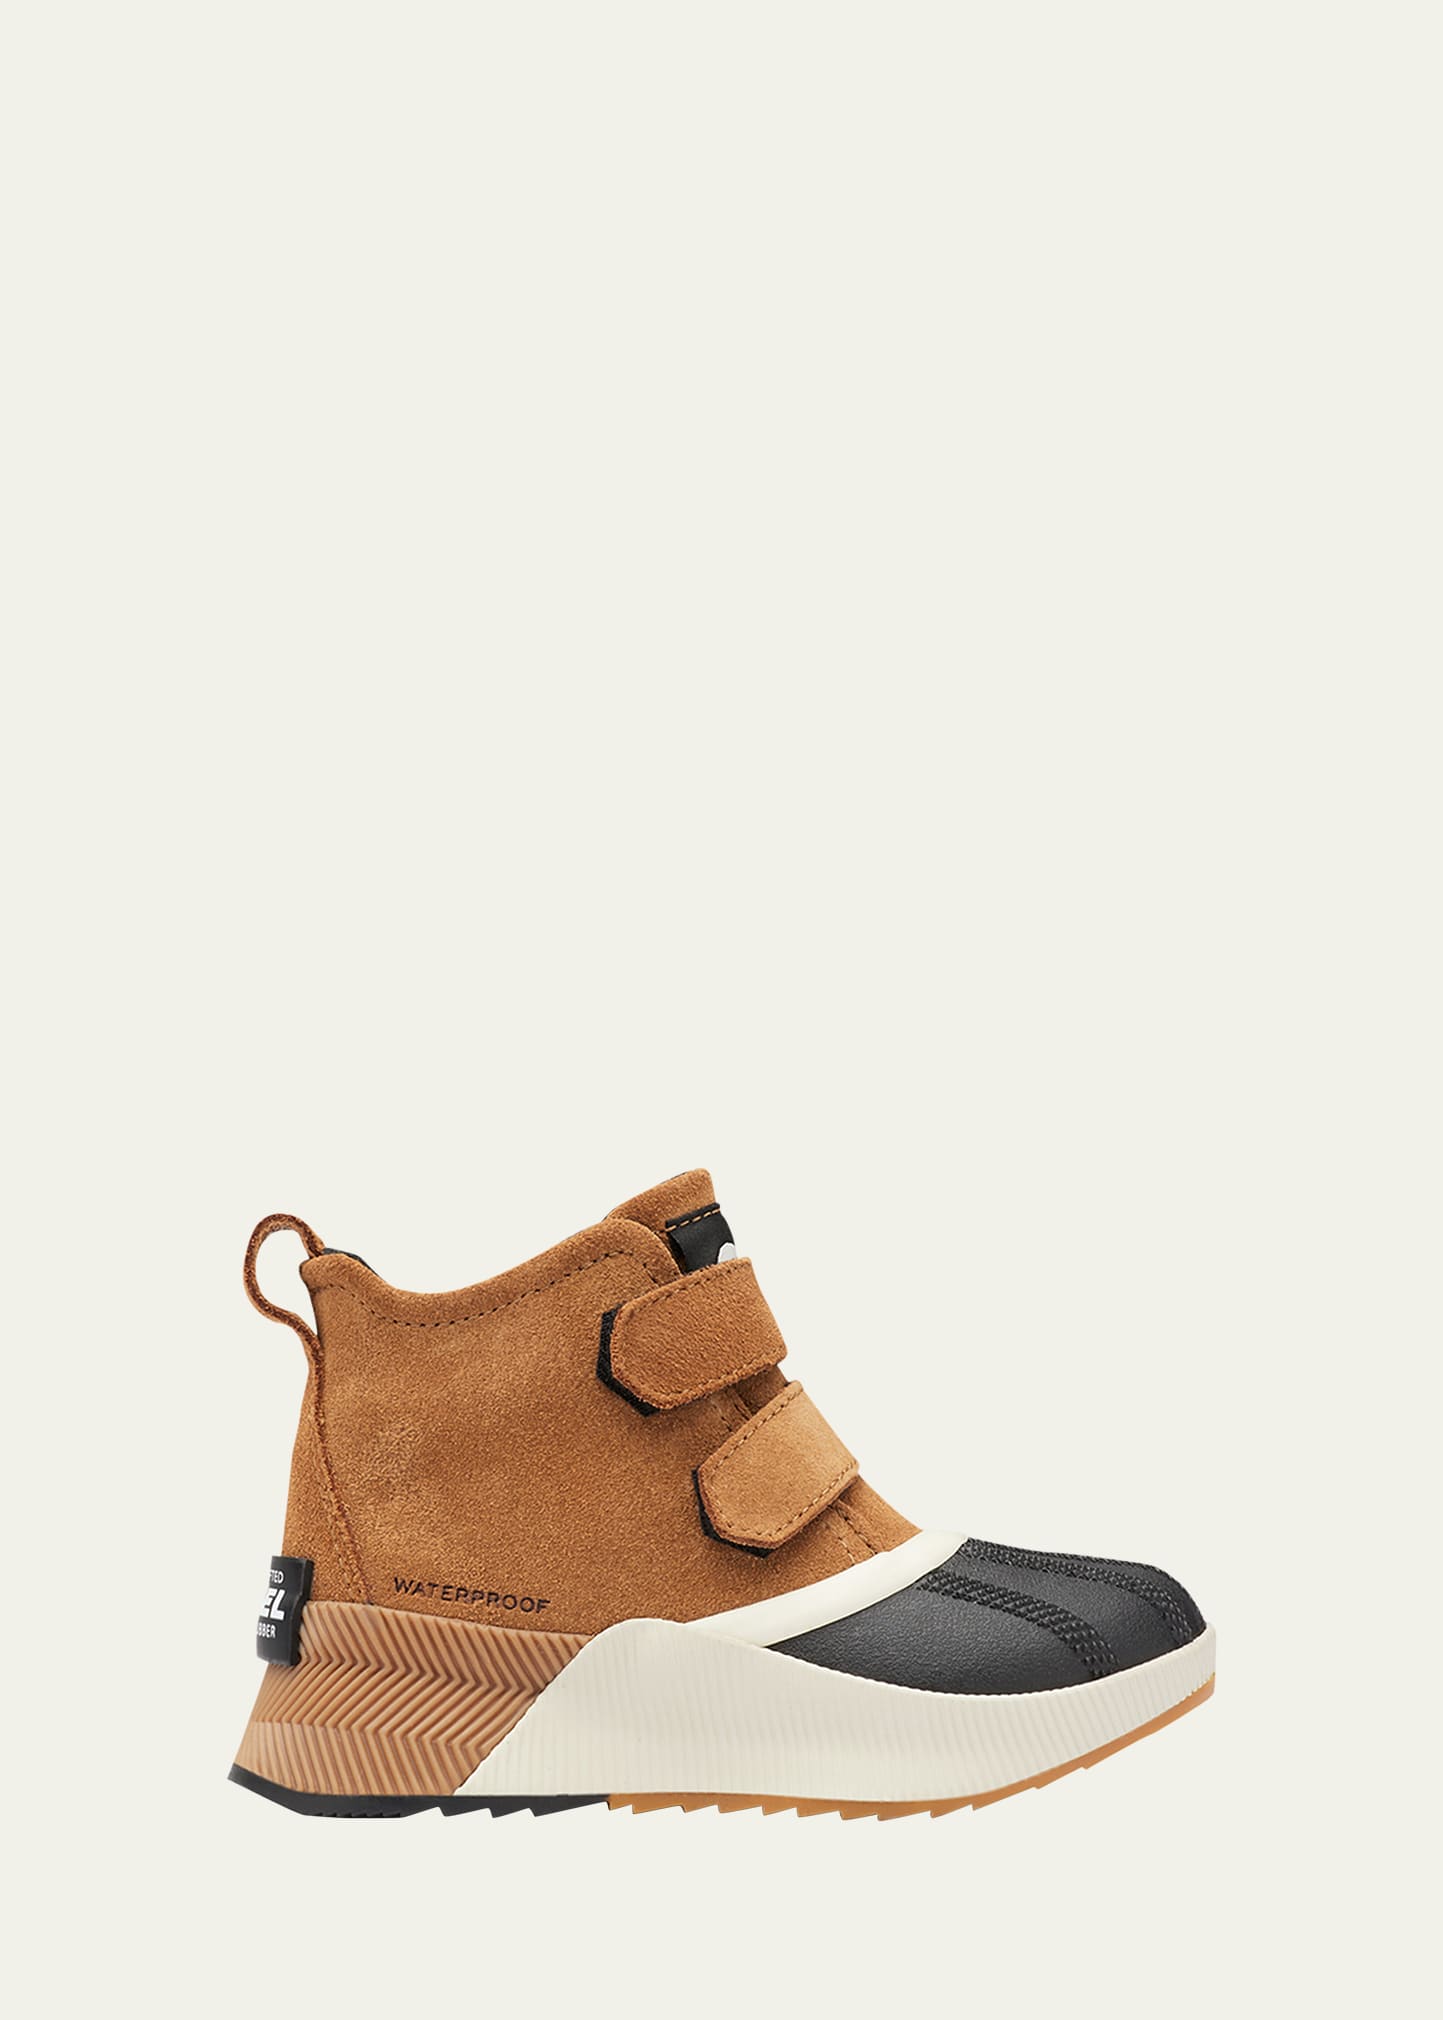 Sorel Kid's Out N About Waterproof Grip-strap Boots, Toddler/kids In Camel Brown